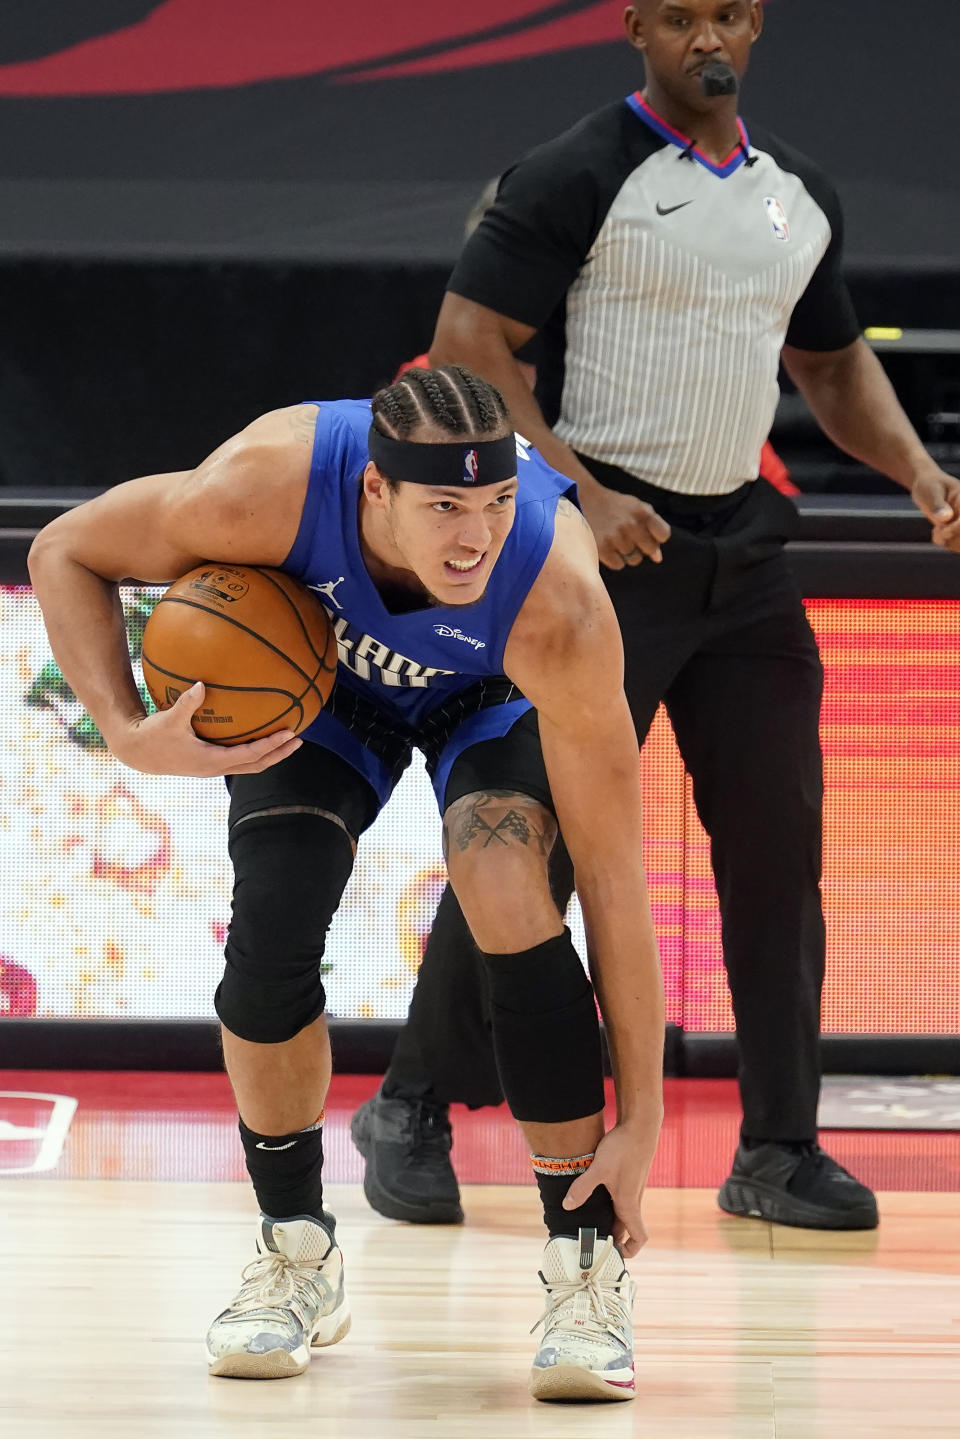 Orlando Magic forward Aaron Gordon (00) grabs his ankle after attempting to drive up the court during the second half of an NBA basketball game against the Toronto Raptors Sunday, Jan. 31, 2021, in Tampa, Fla. Gordon left the game. (AP Photo/Chris O'Meara)